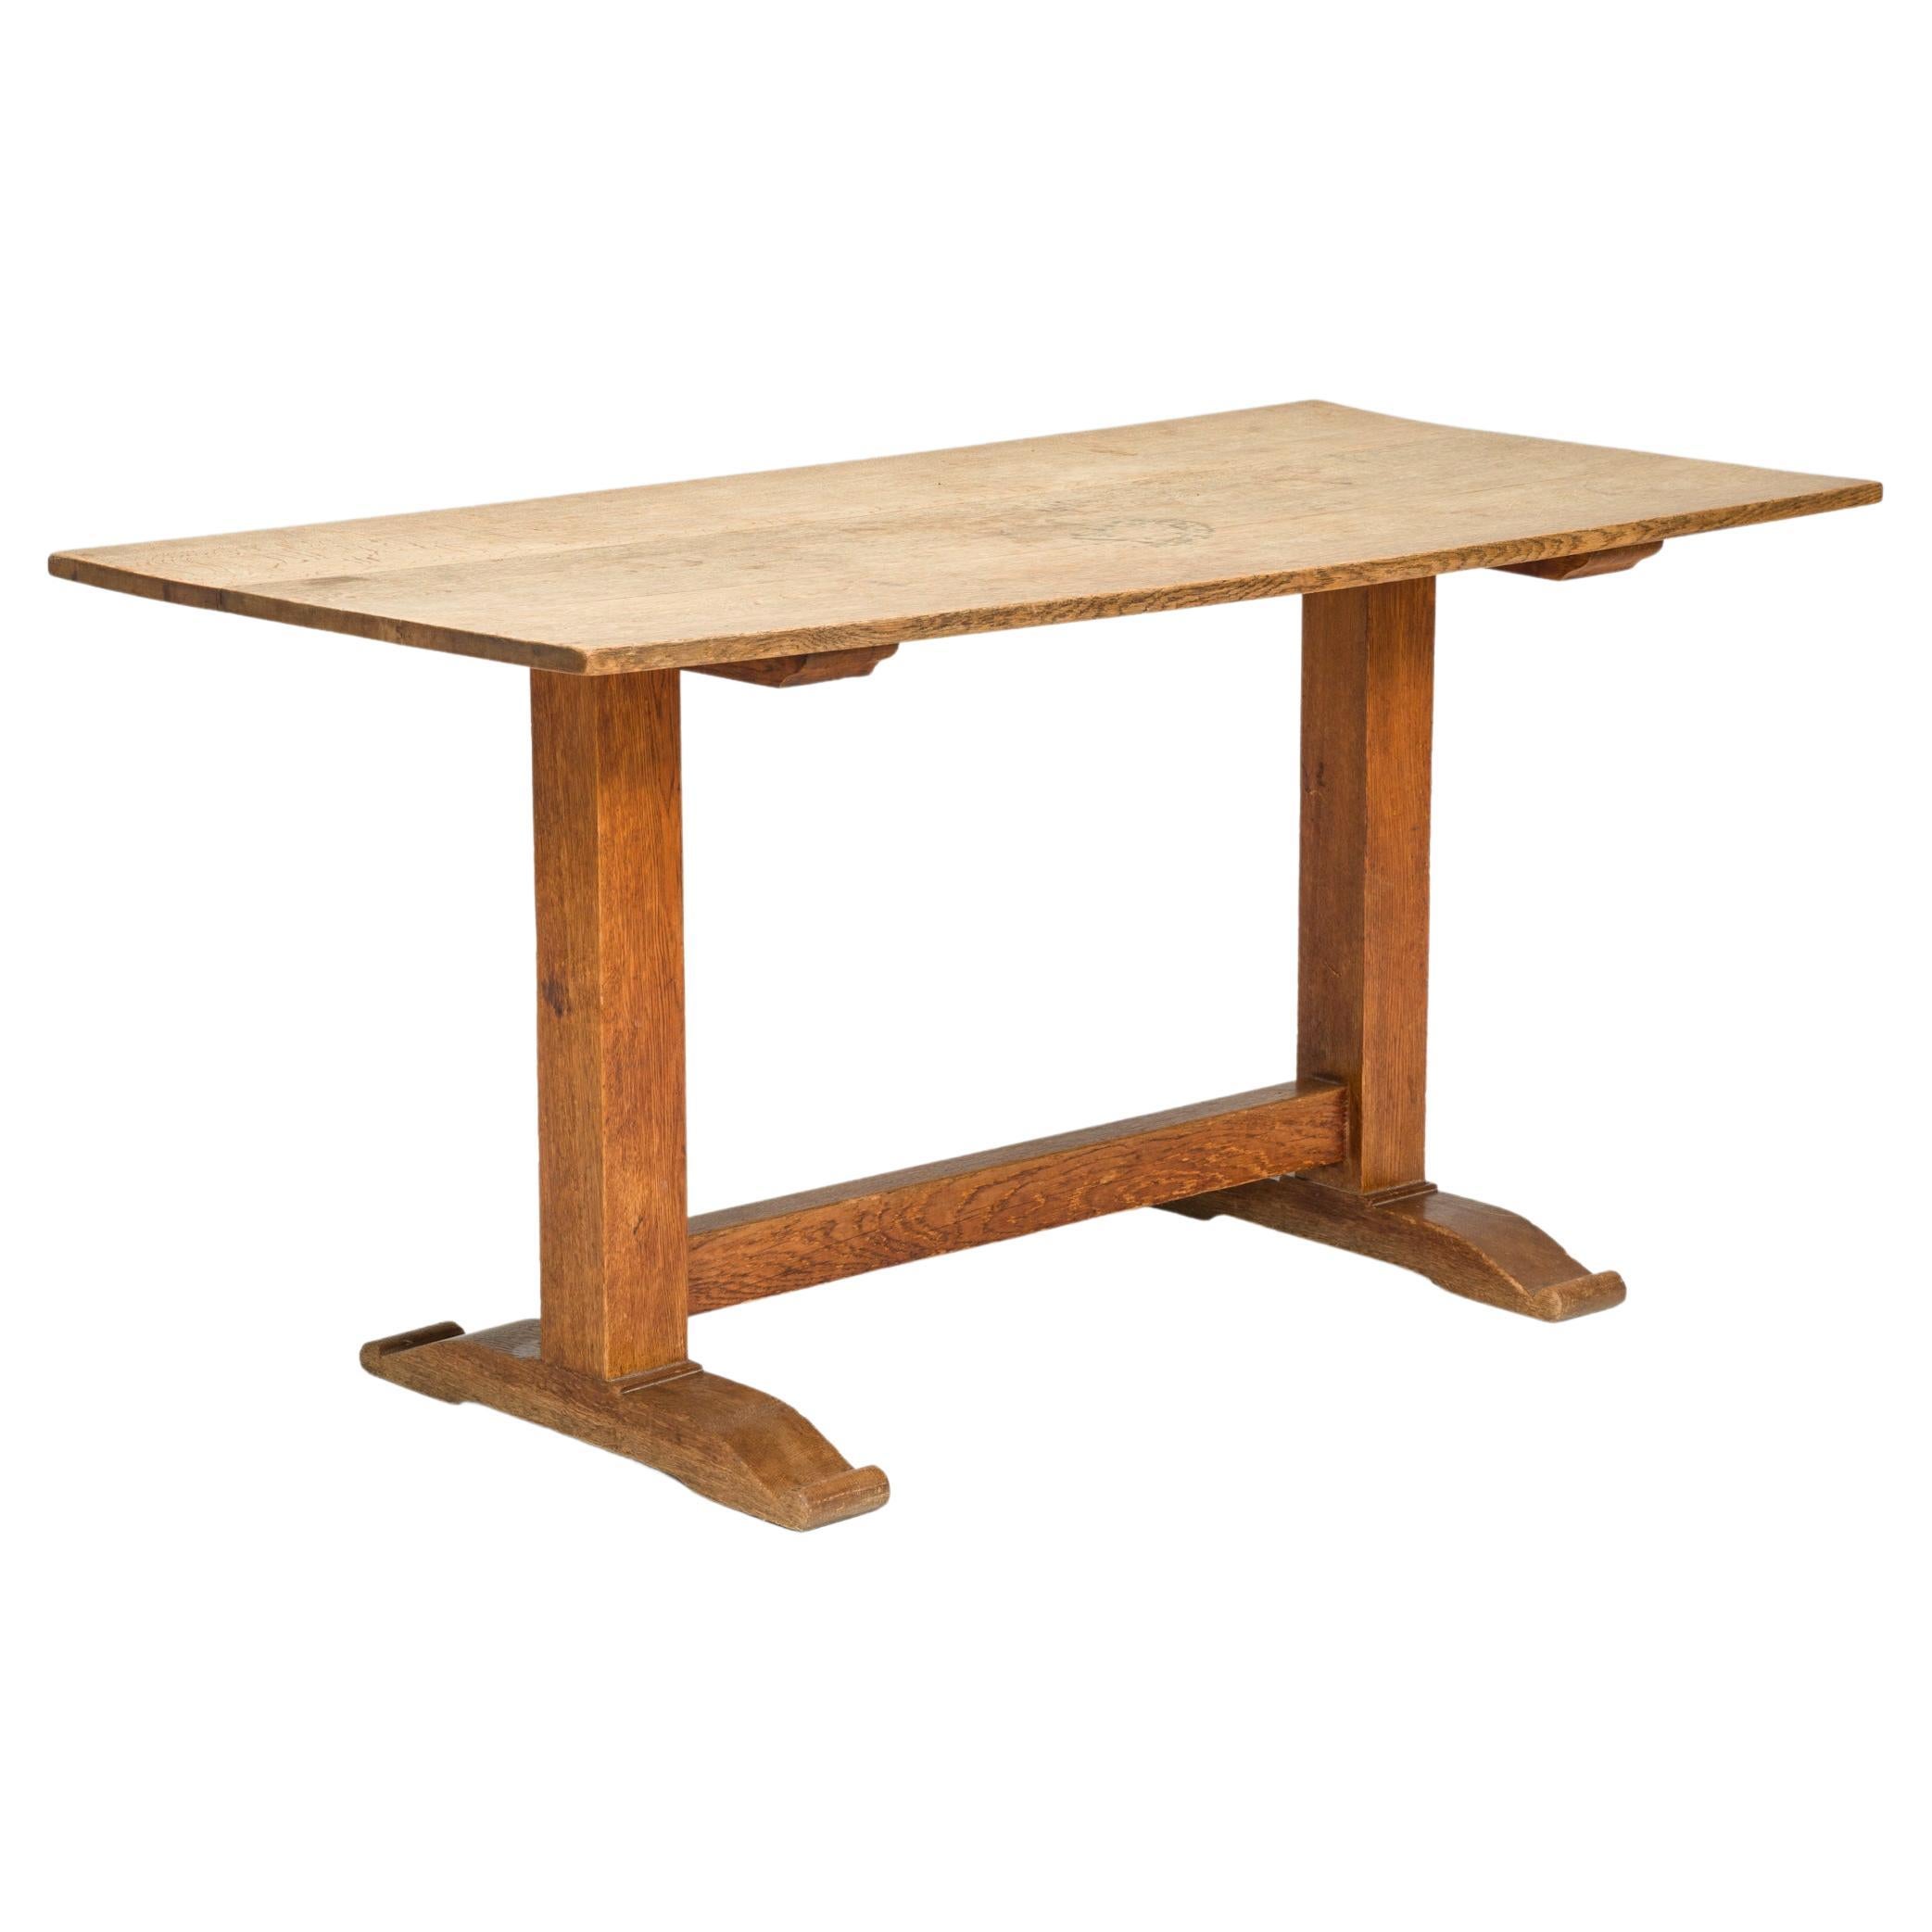 Arts & Crafts Style Refectory Wooden Rectangular Dining Table